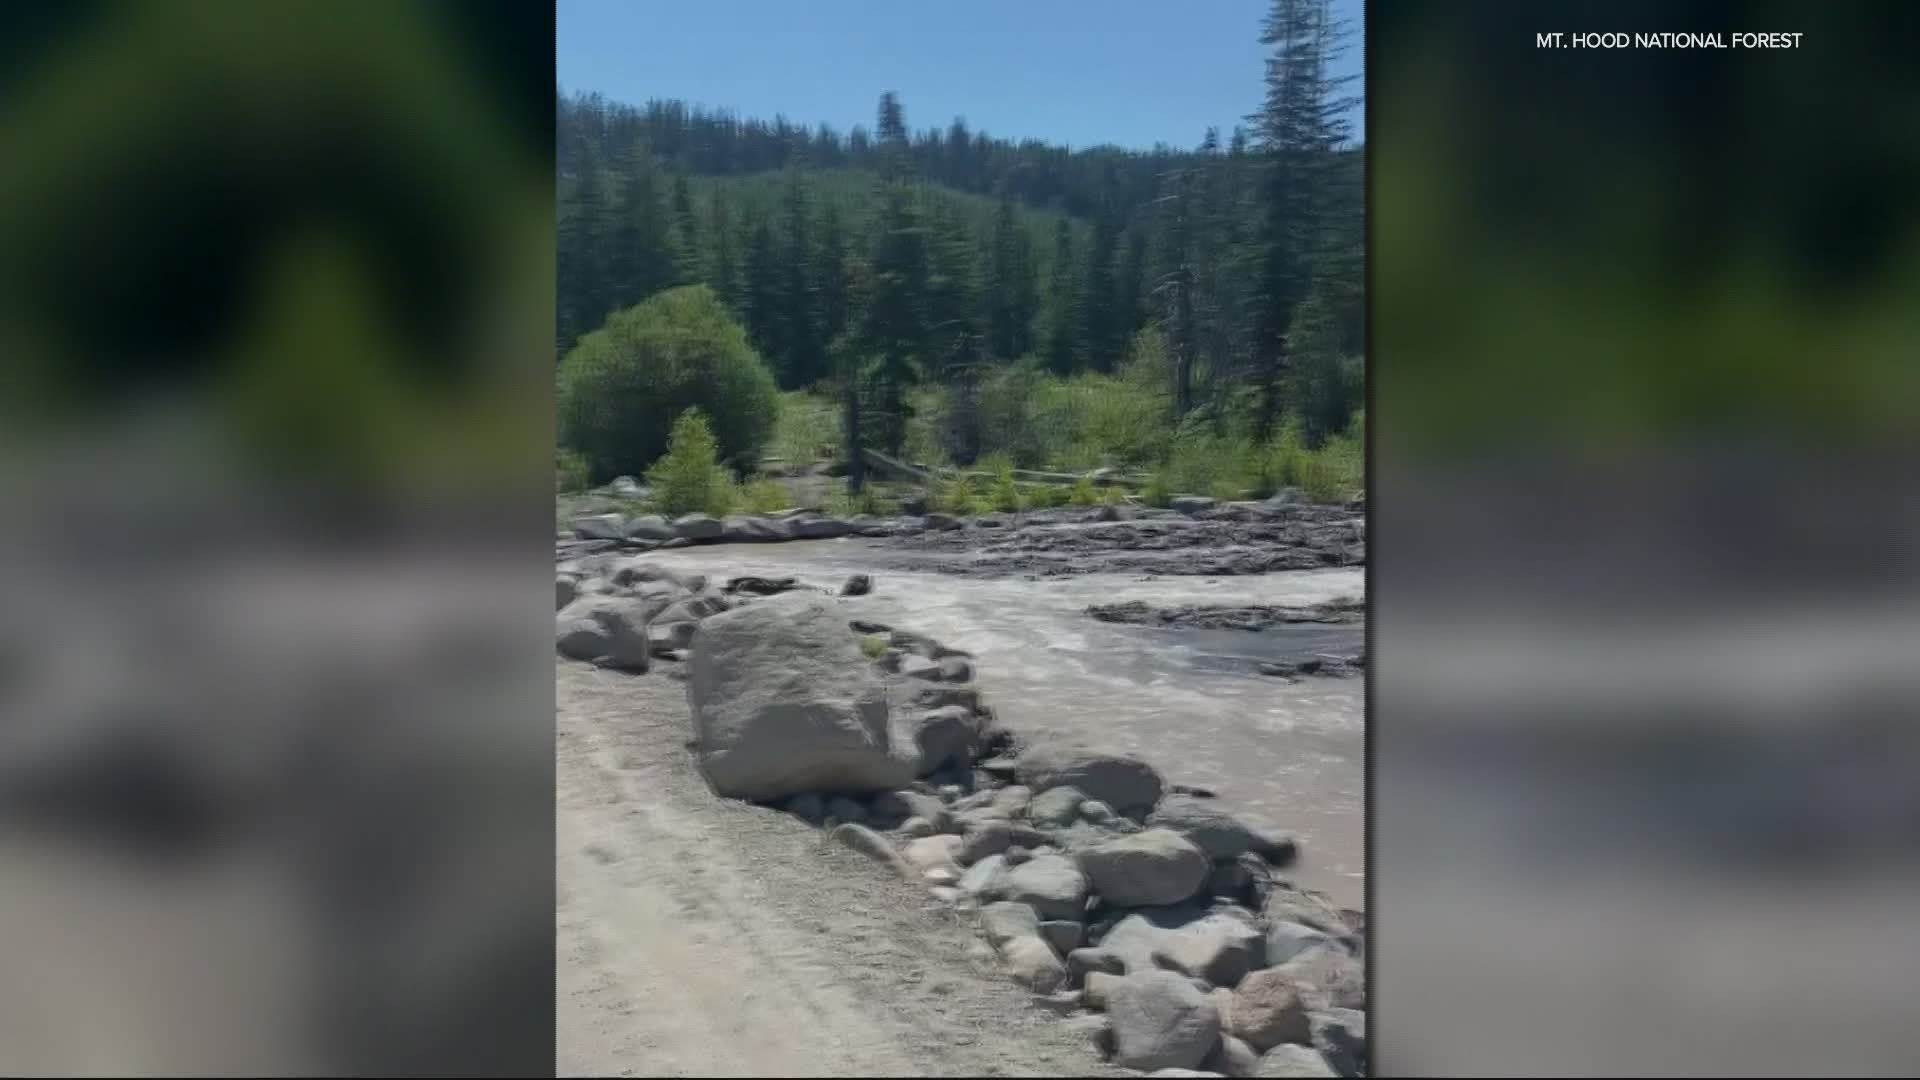 The hot temperatures this weekend melted snow and washed out a road leading to the Laurance Lake campground near Parkdale, forcing its evacuation.